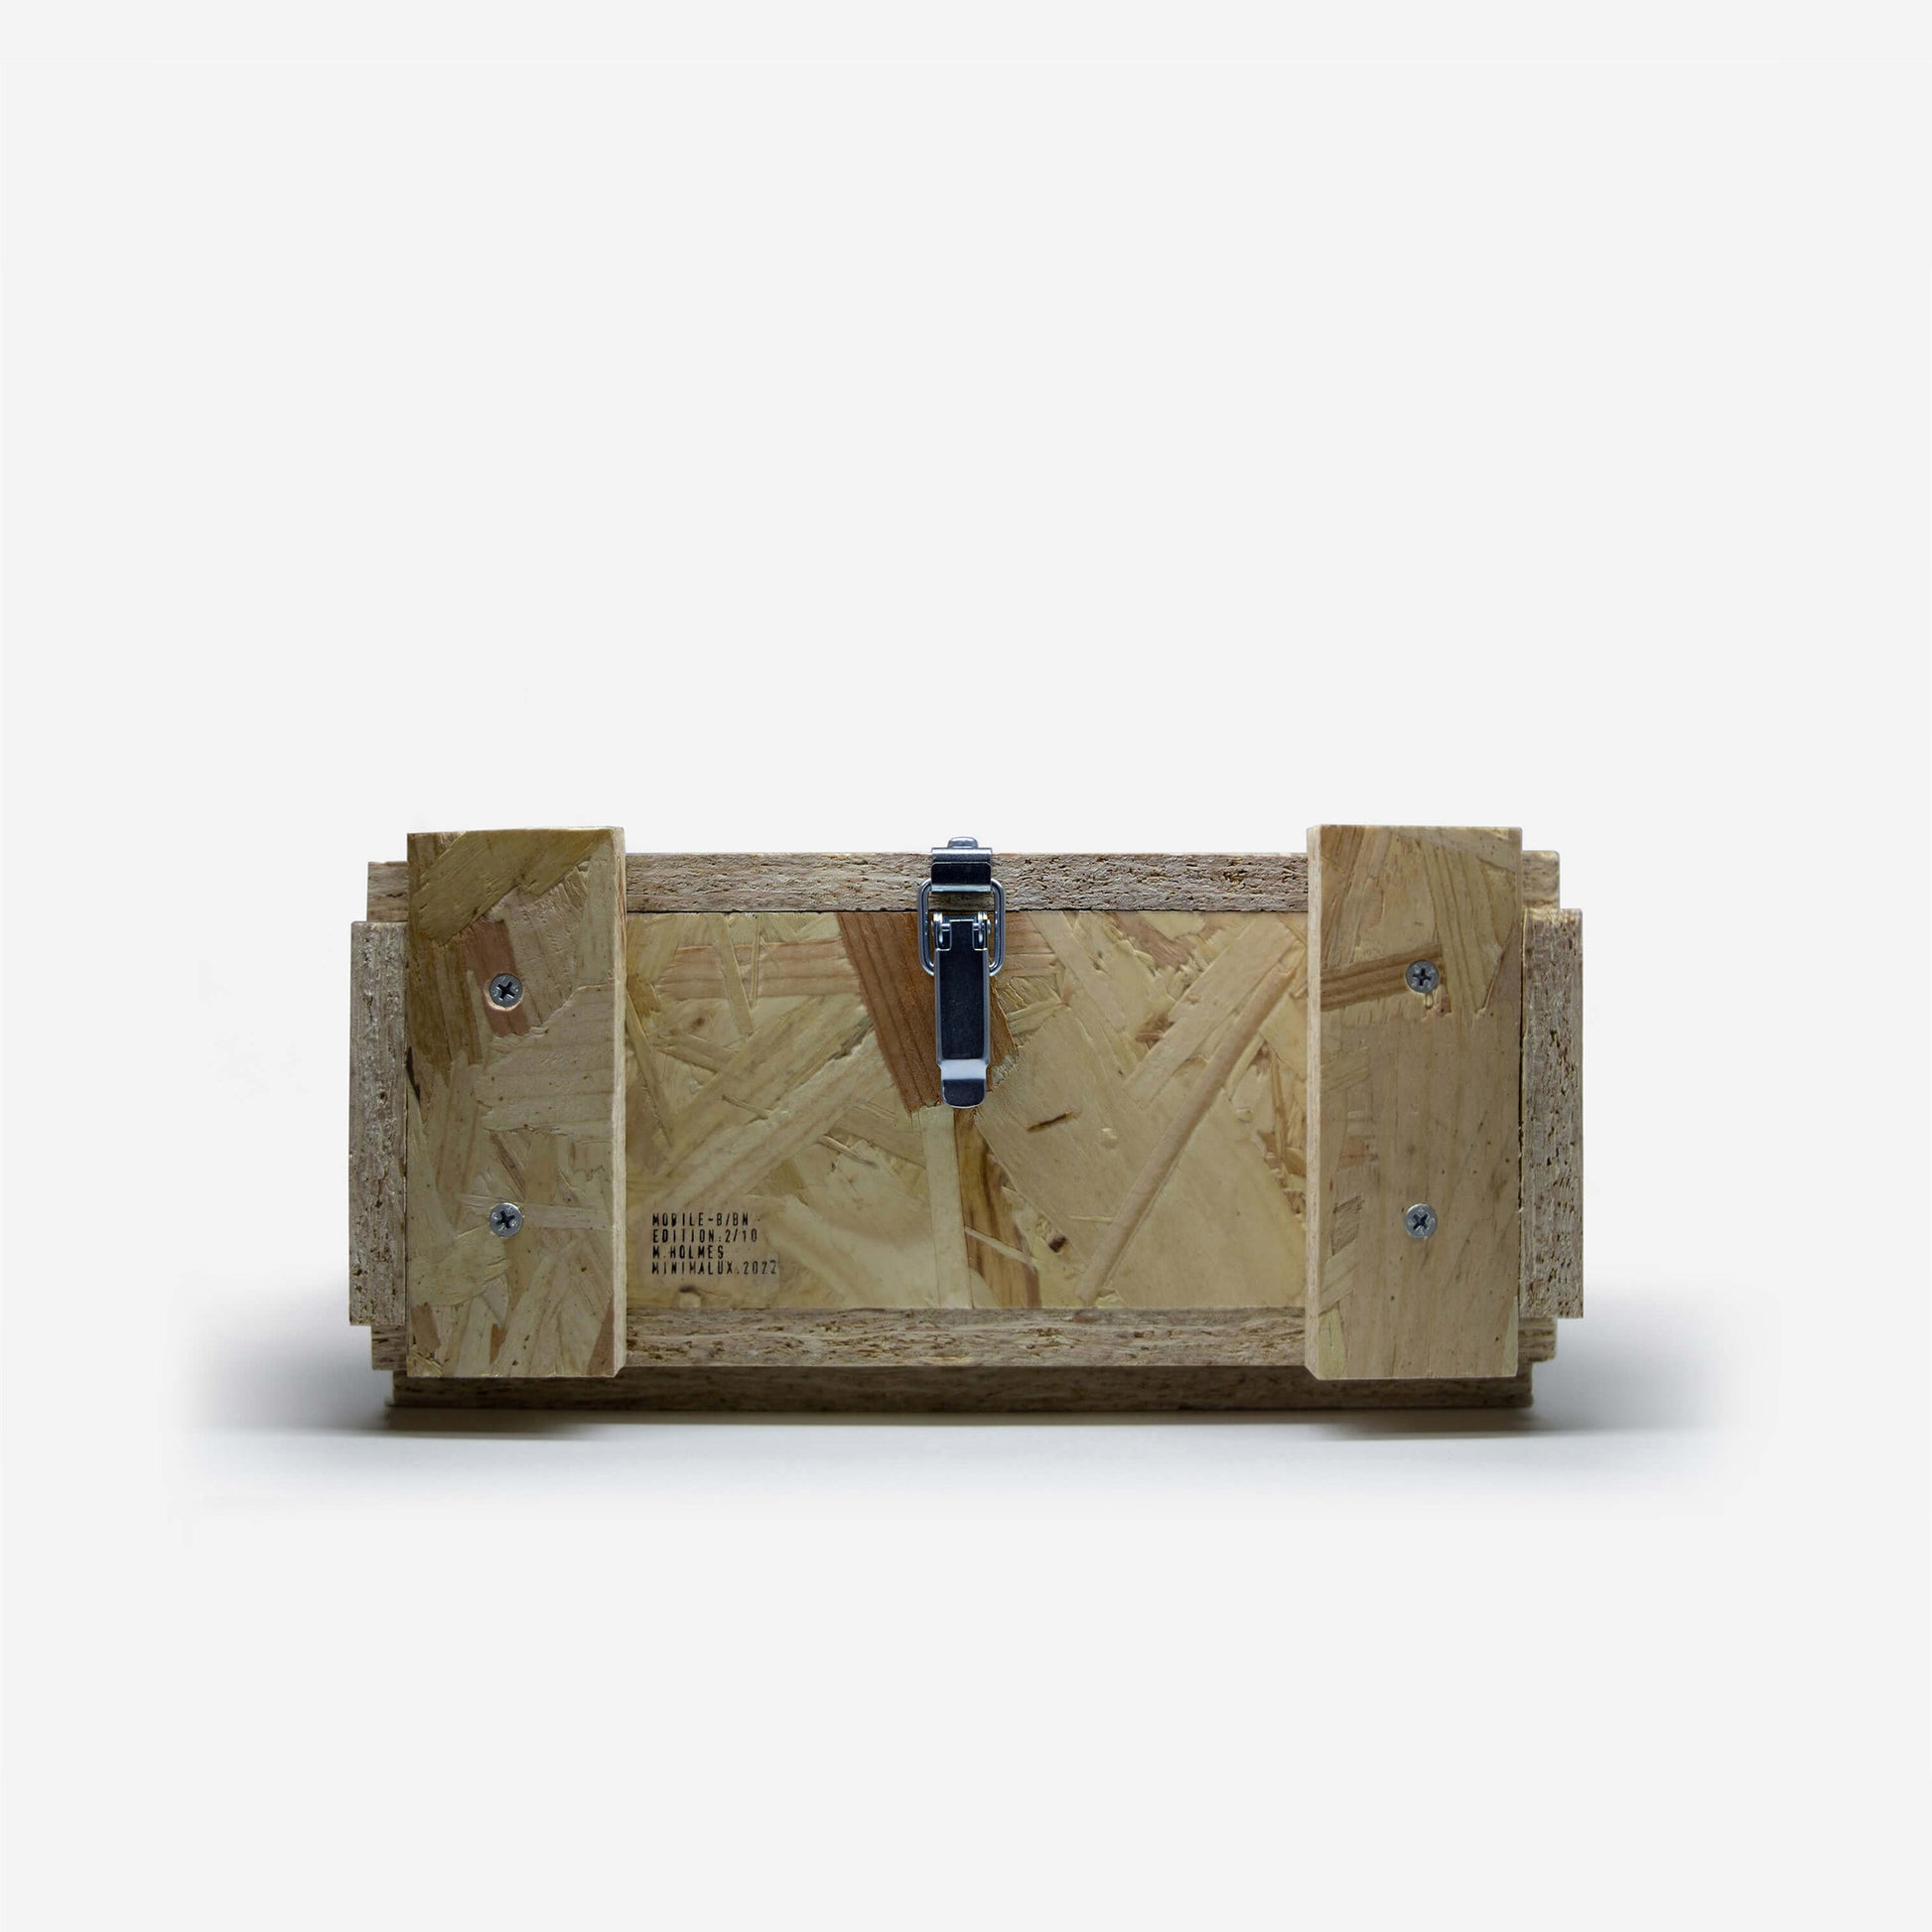 Crate for Mobile - Minimalux